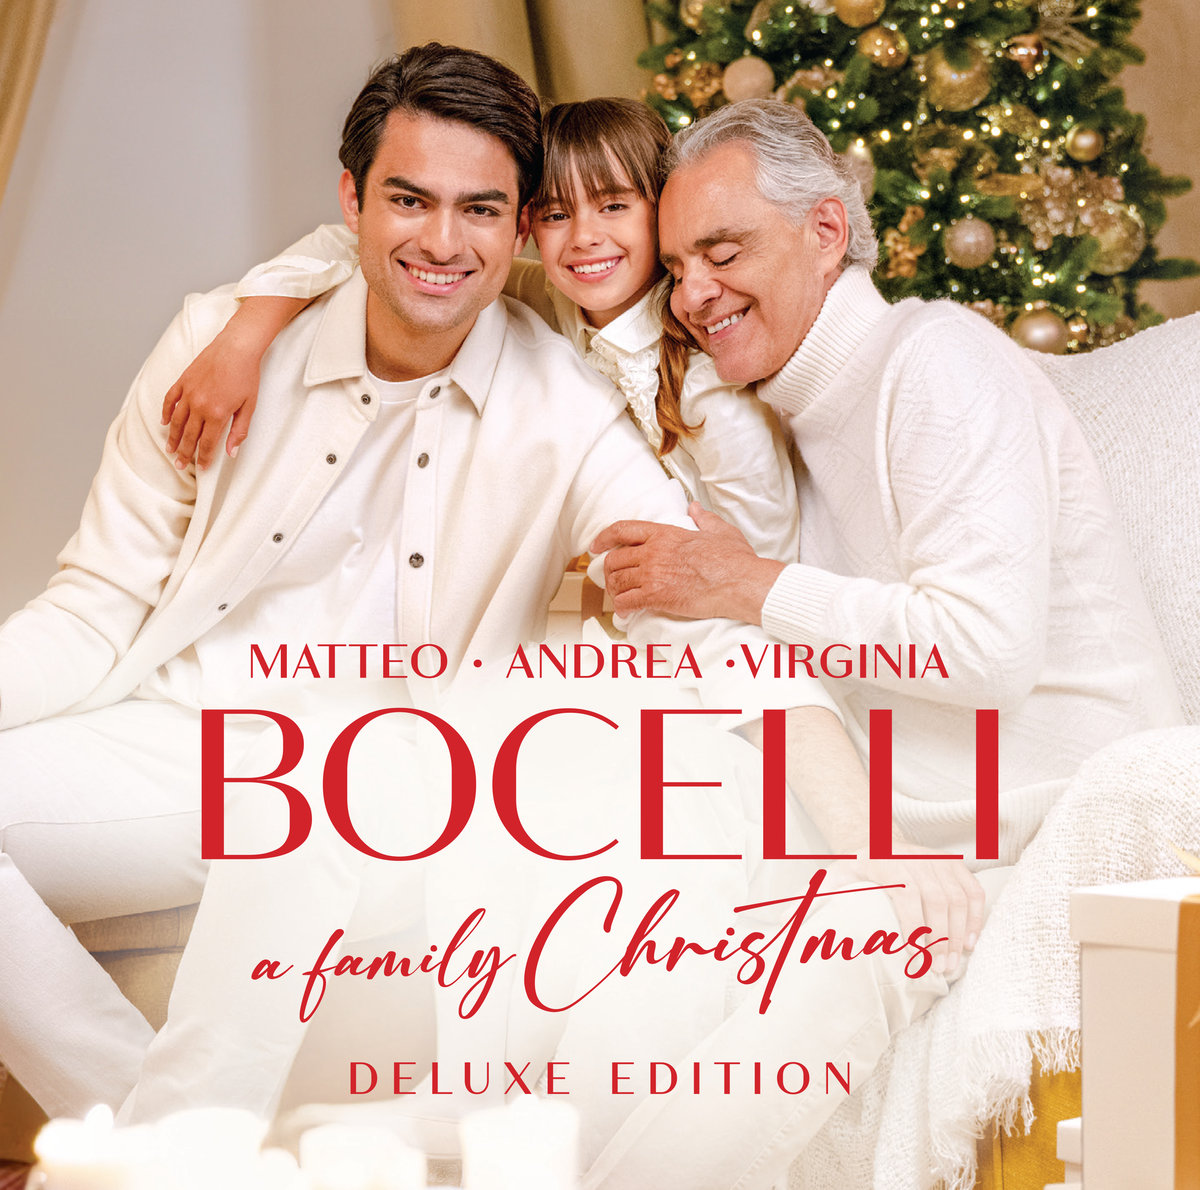 A Family Christmas (Deluxe Edition)